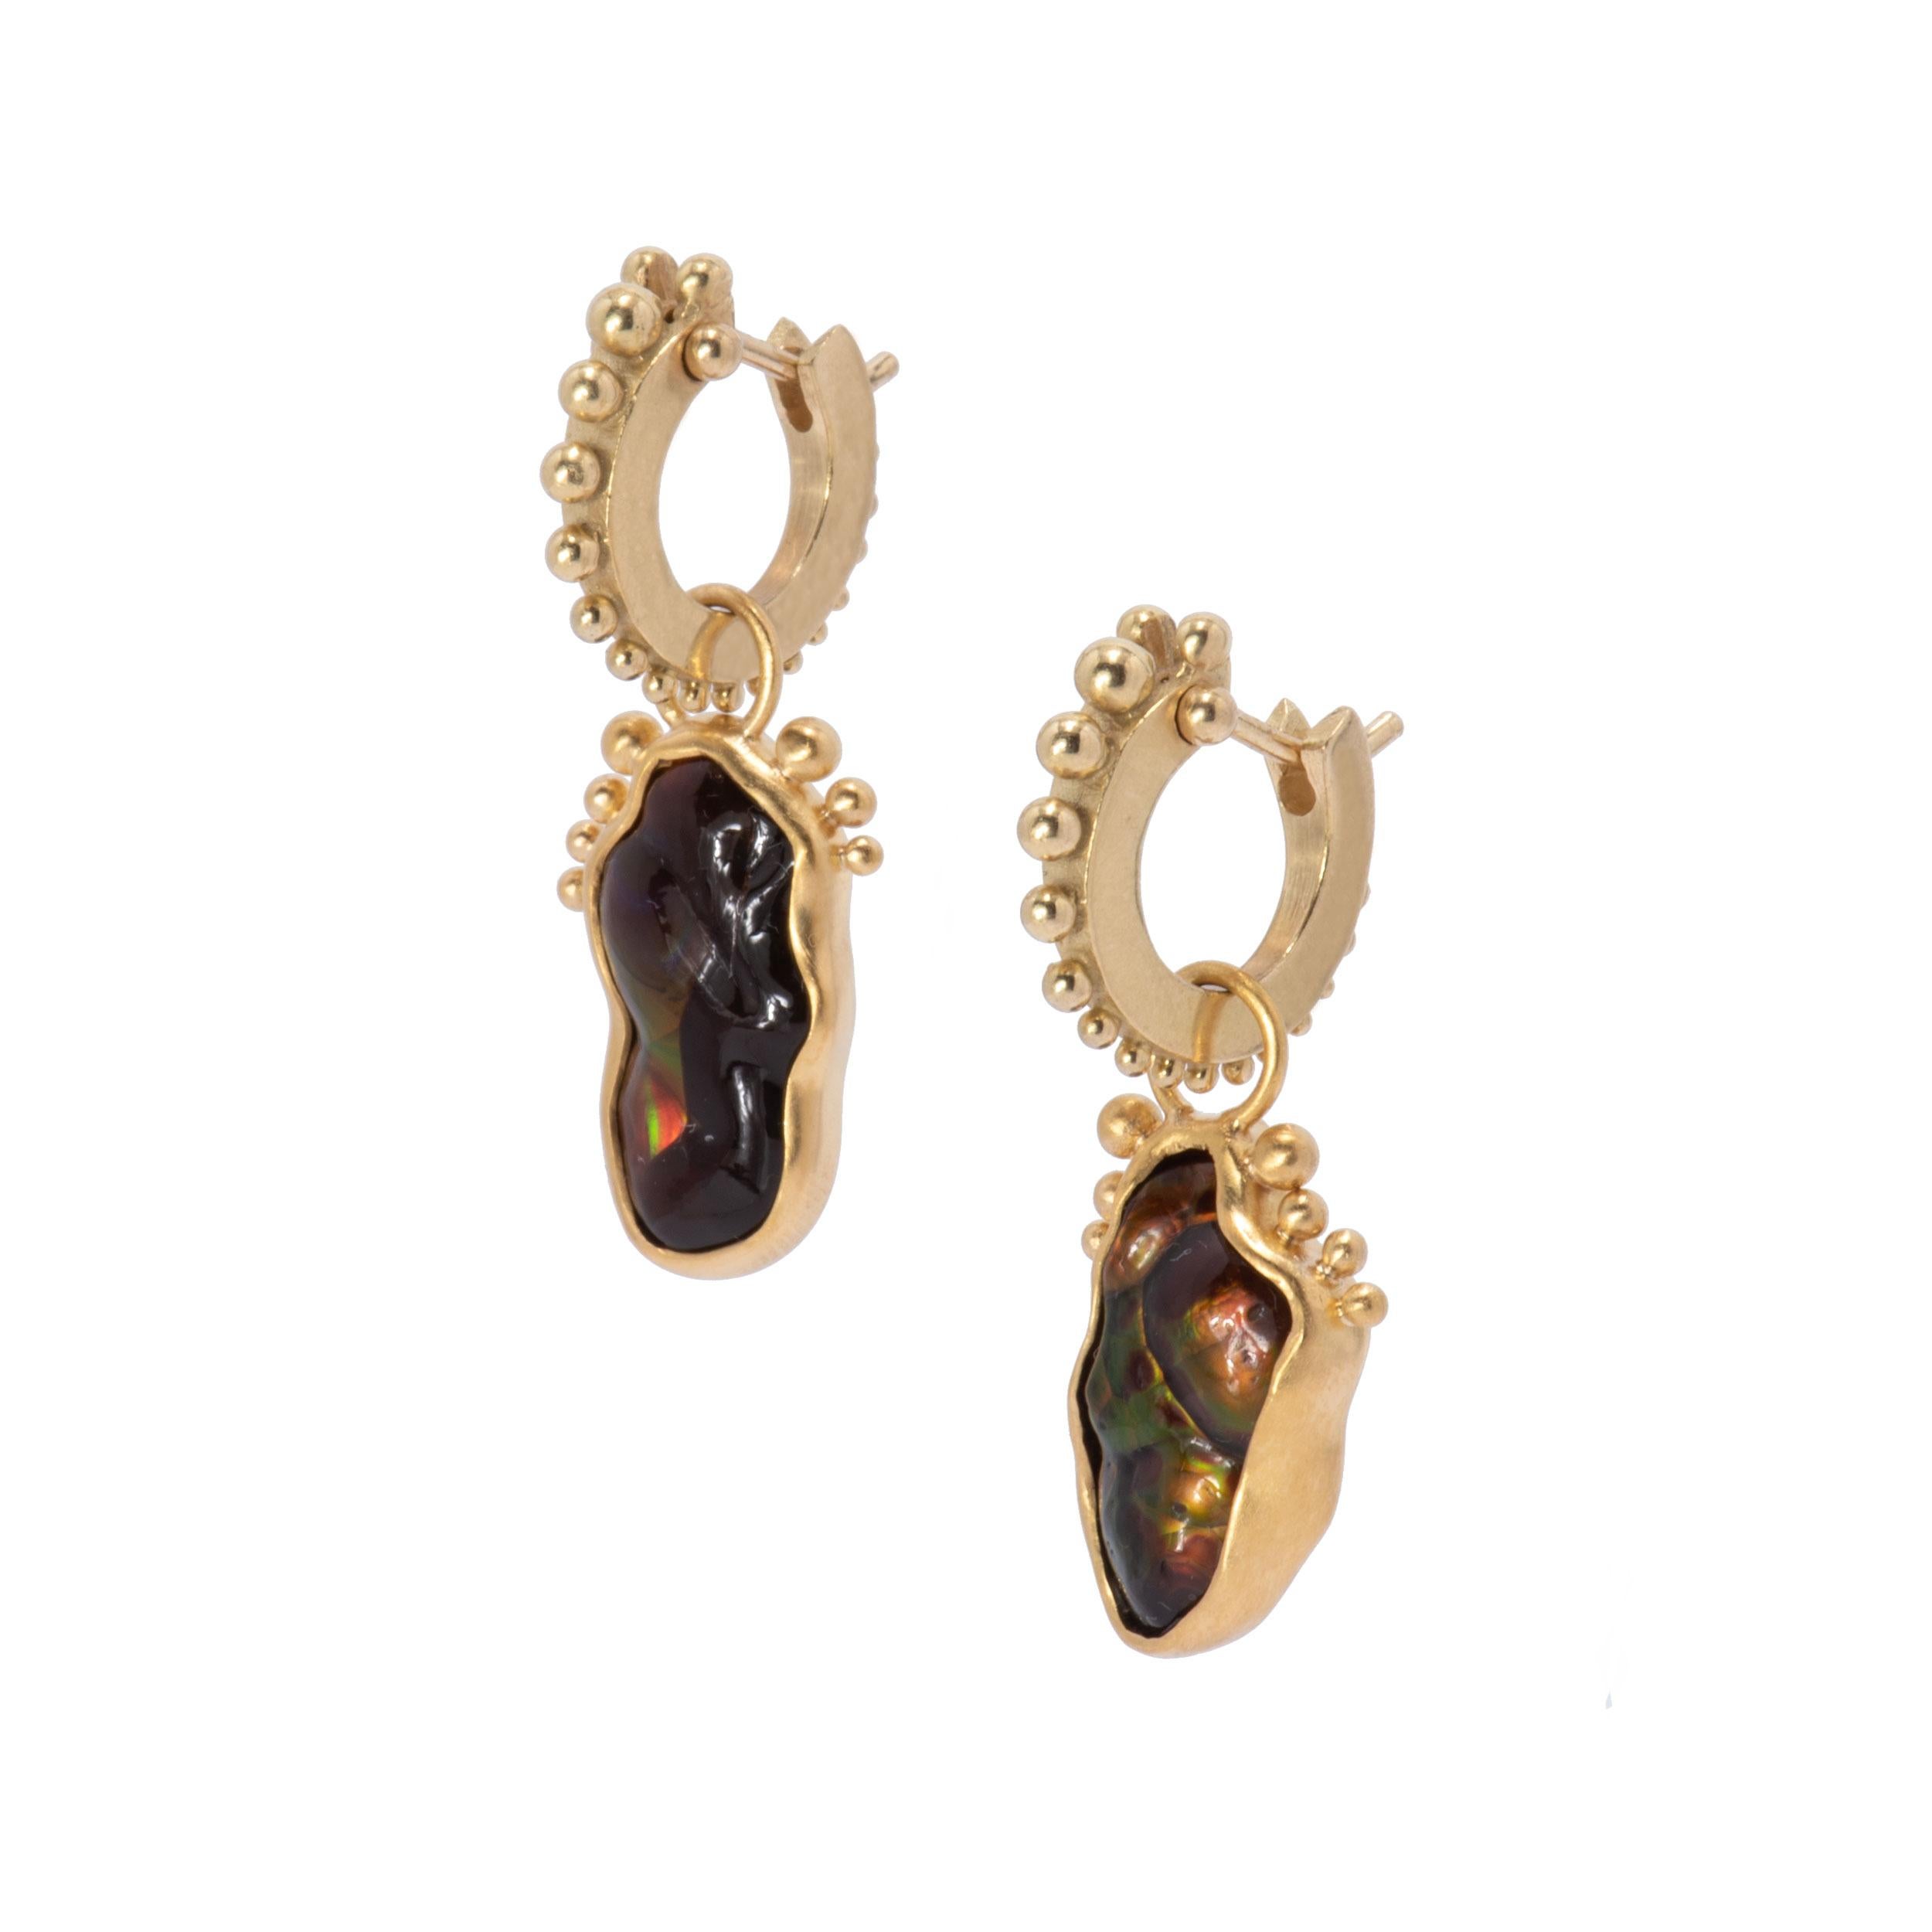 Natural fire agates glowing with orange, green, red and yellow are framed in 22 karat gold and beaded like footsteps preserved in ancient clay. Hung from 18 karat gold narrow beaded hoops which click tightly shut for security, the beading is